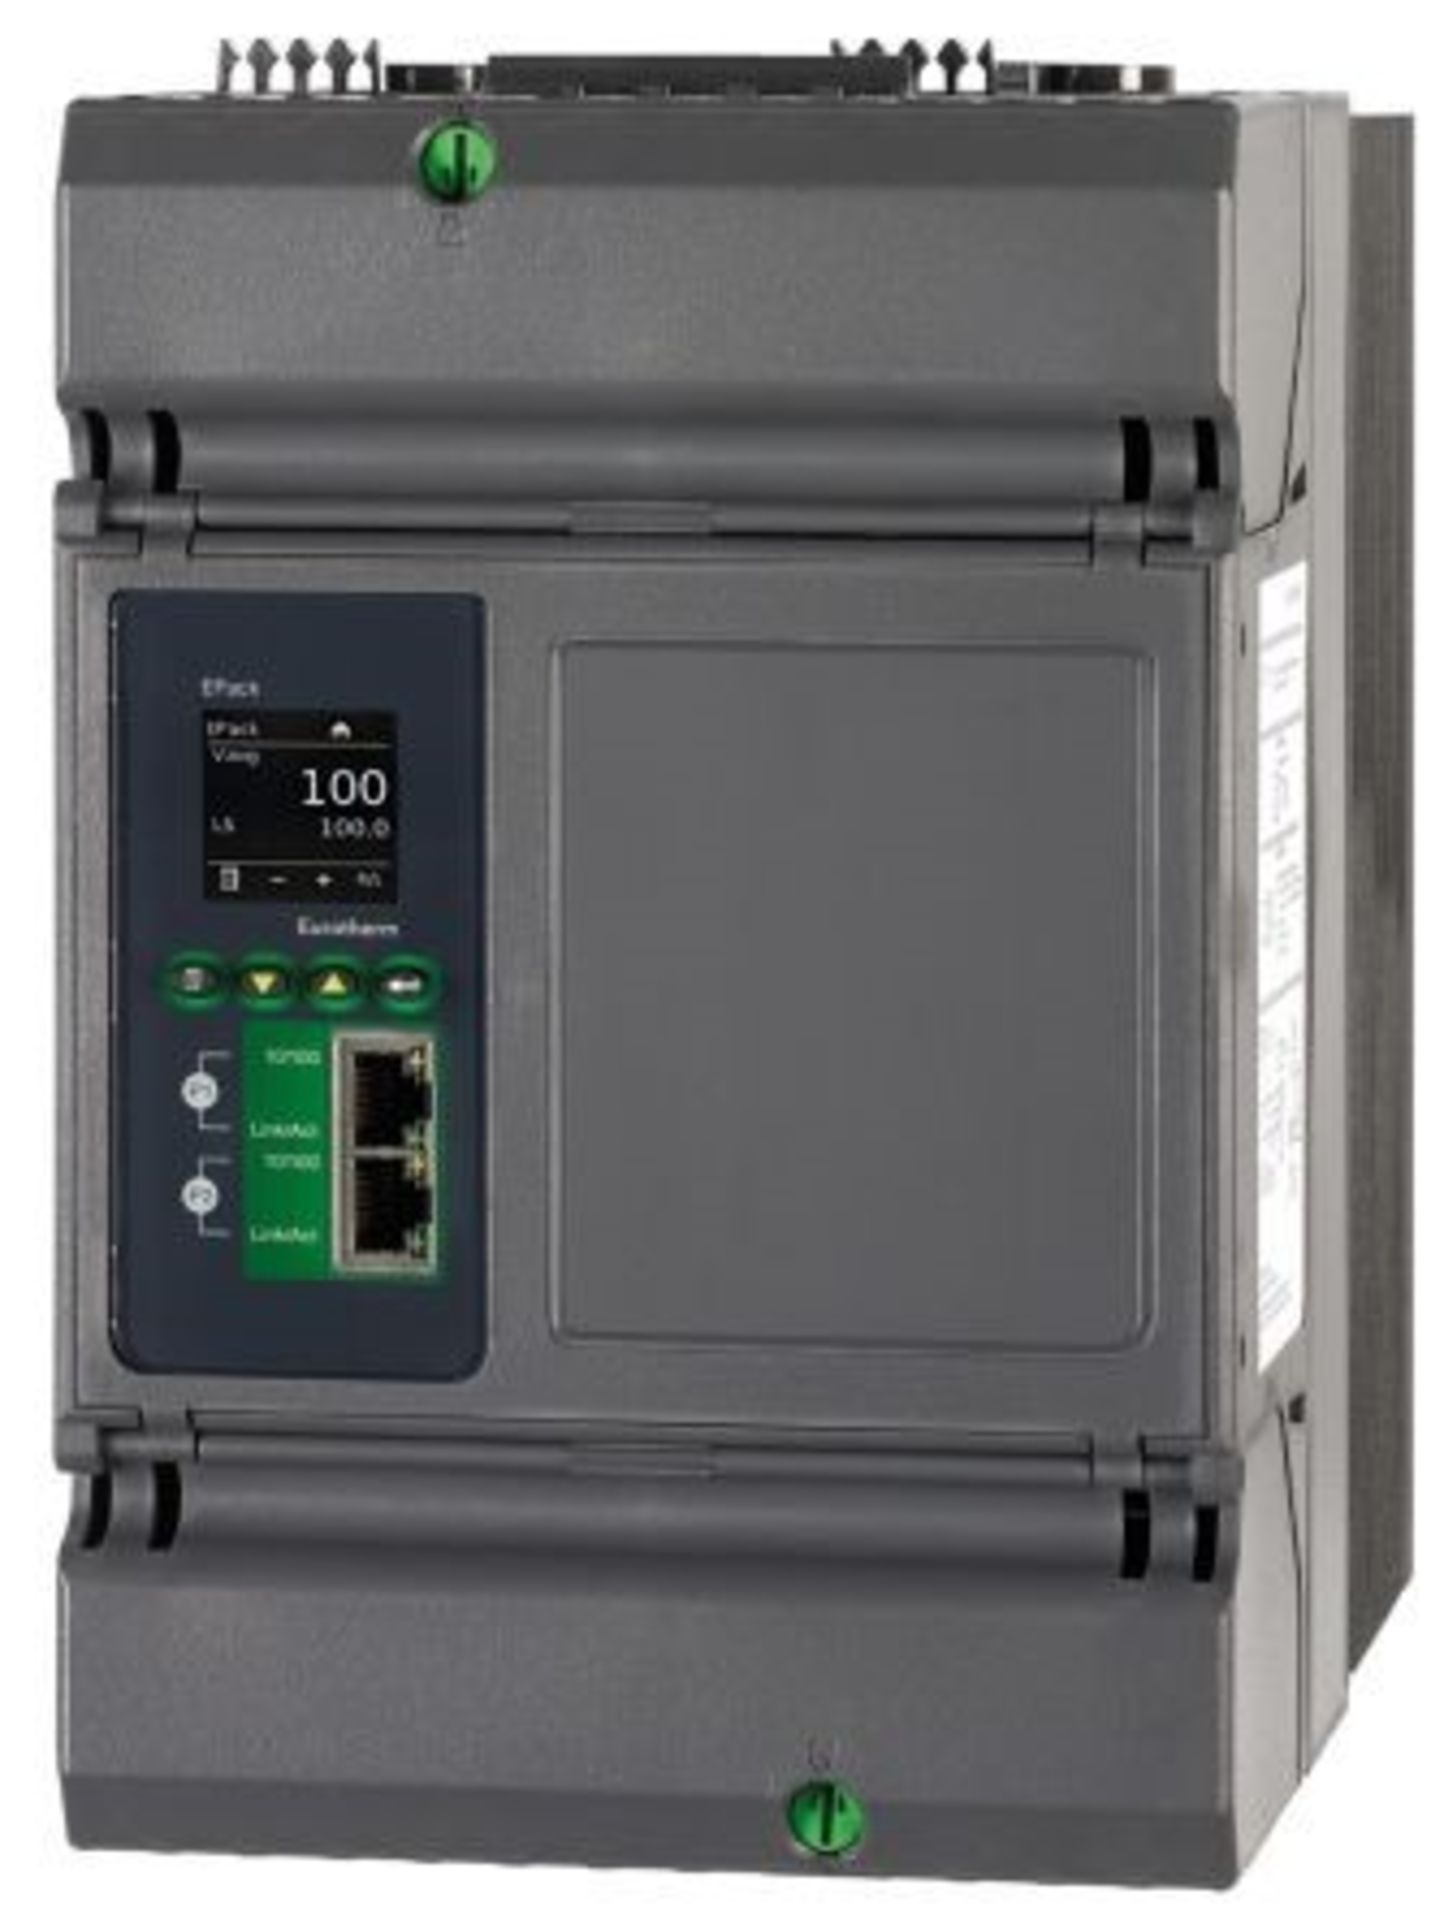 Eurotherm Power Control, Analogue, Digital Input, 100 A 2 Phase